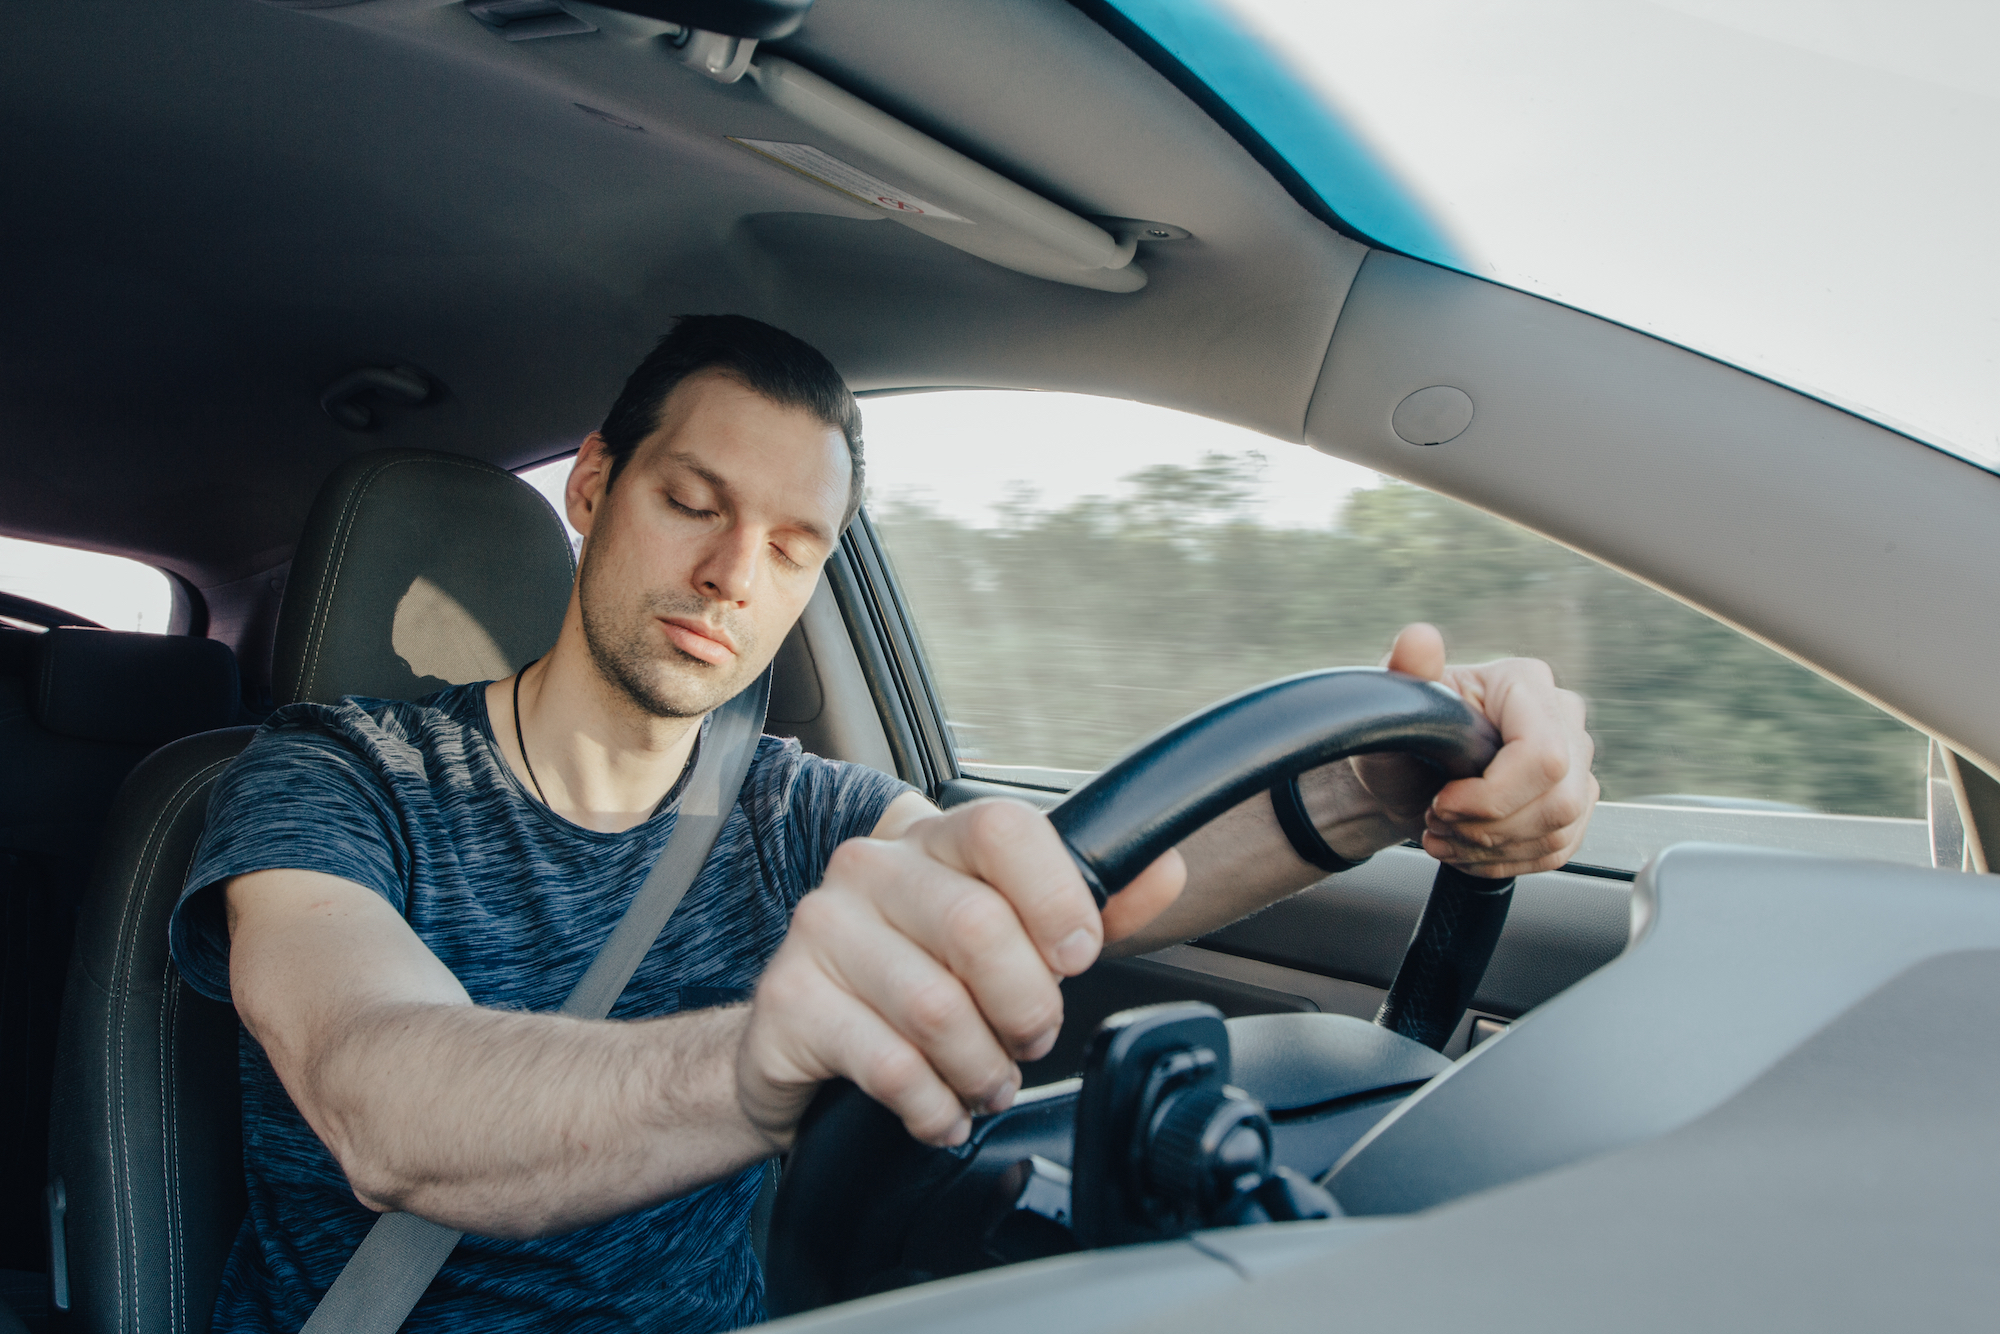 6 Must-Have Car Accessories to Improve Your Driving Experience